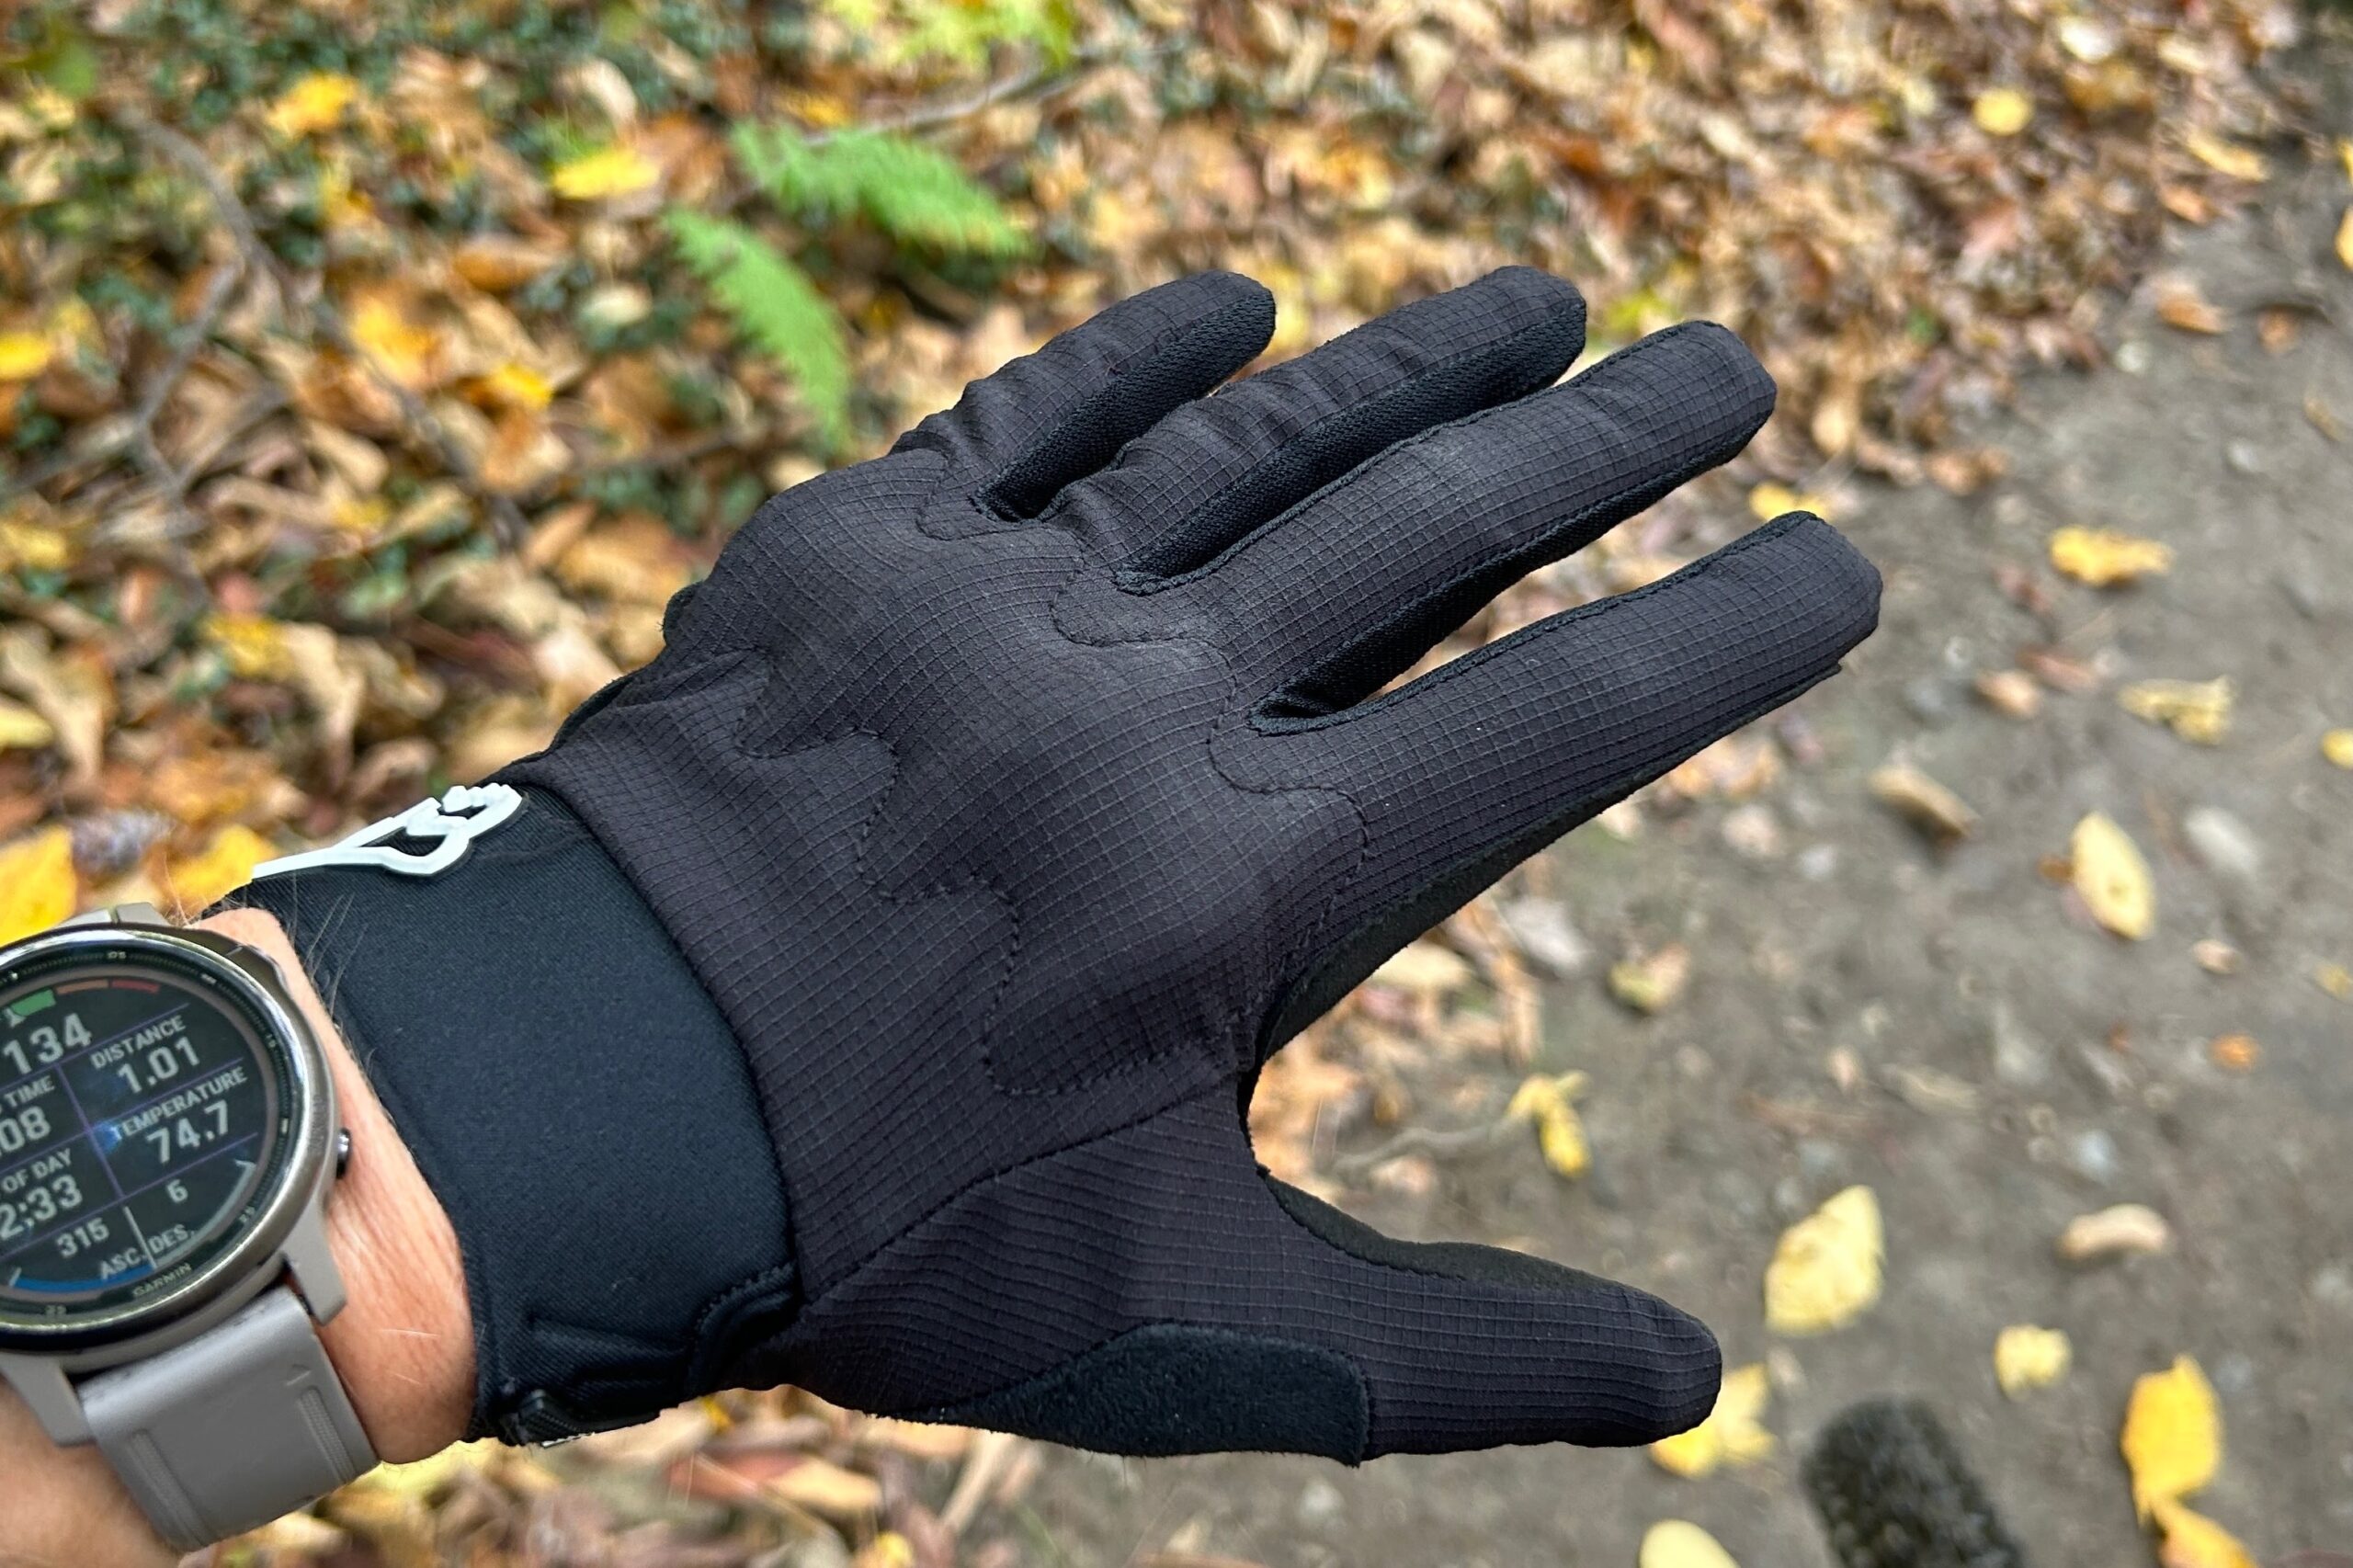 The D30 knuckle protection on the Fox Defend D30 mountain bike gloves